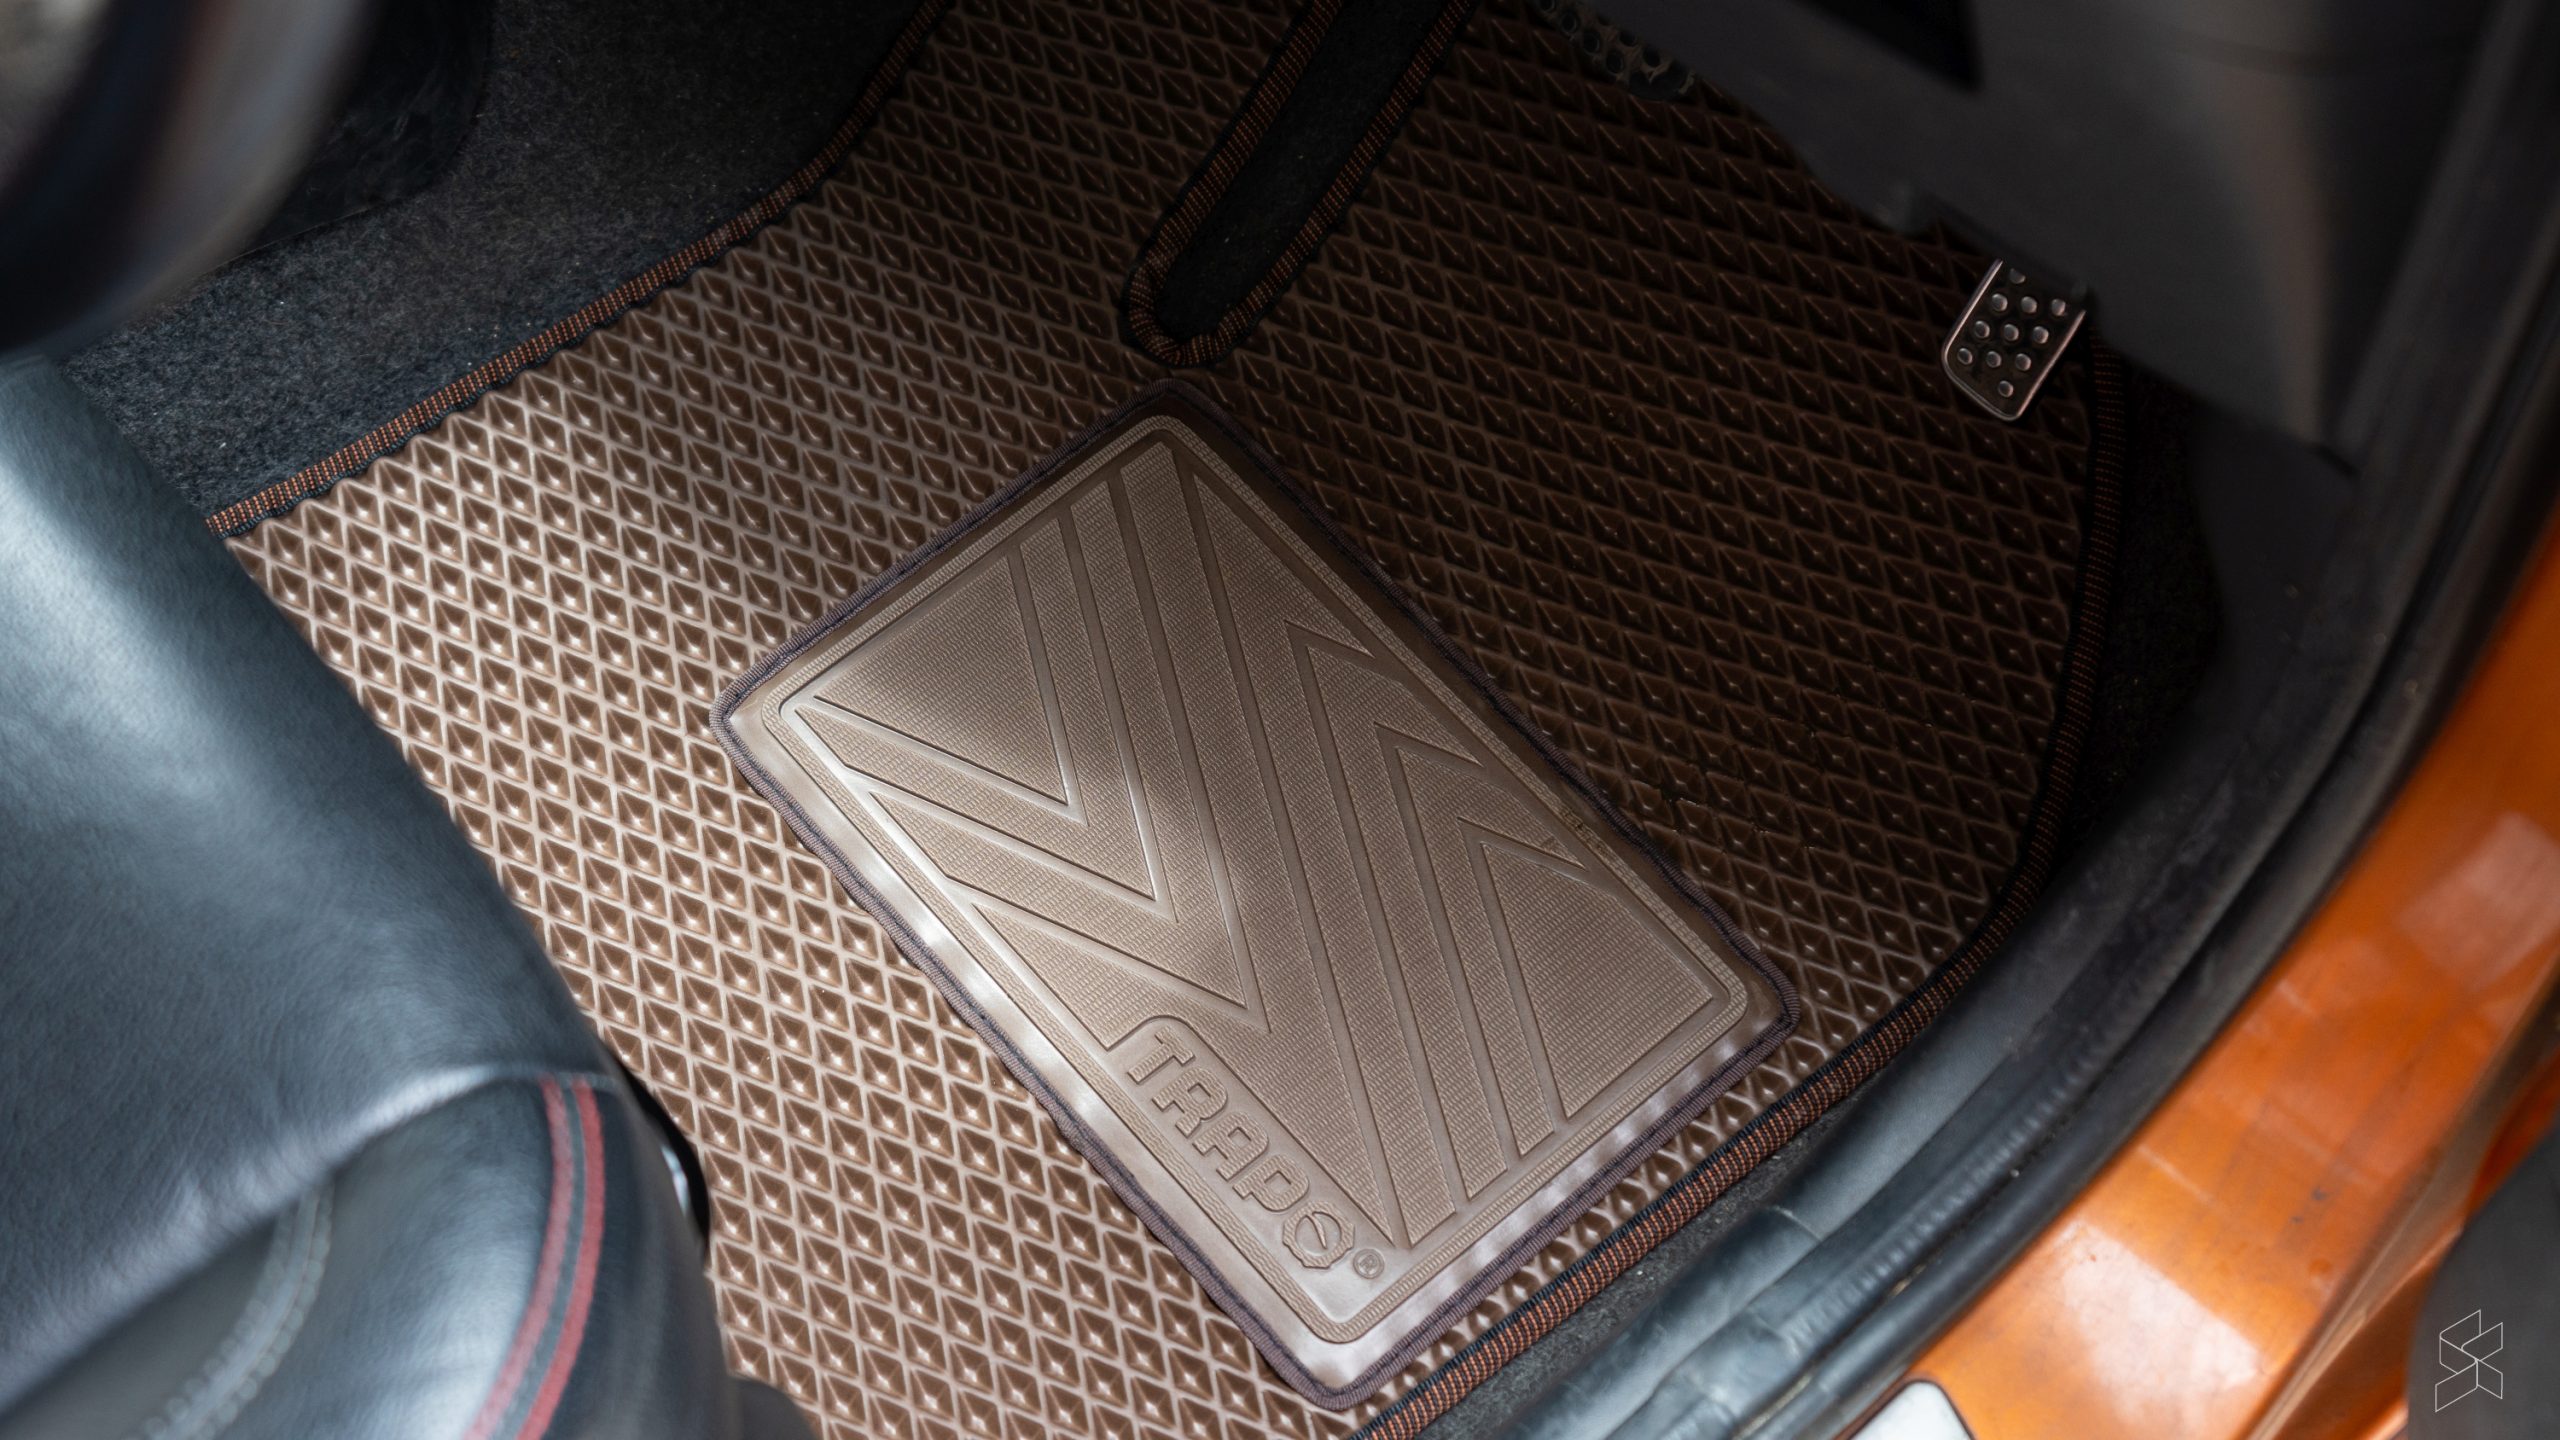 Car review trapo mat Video: The